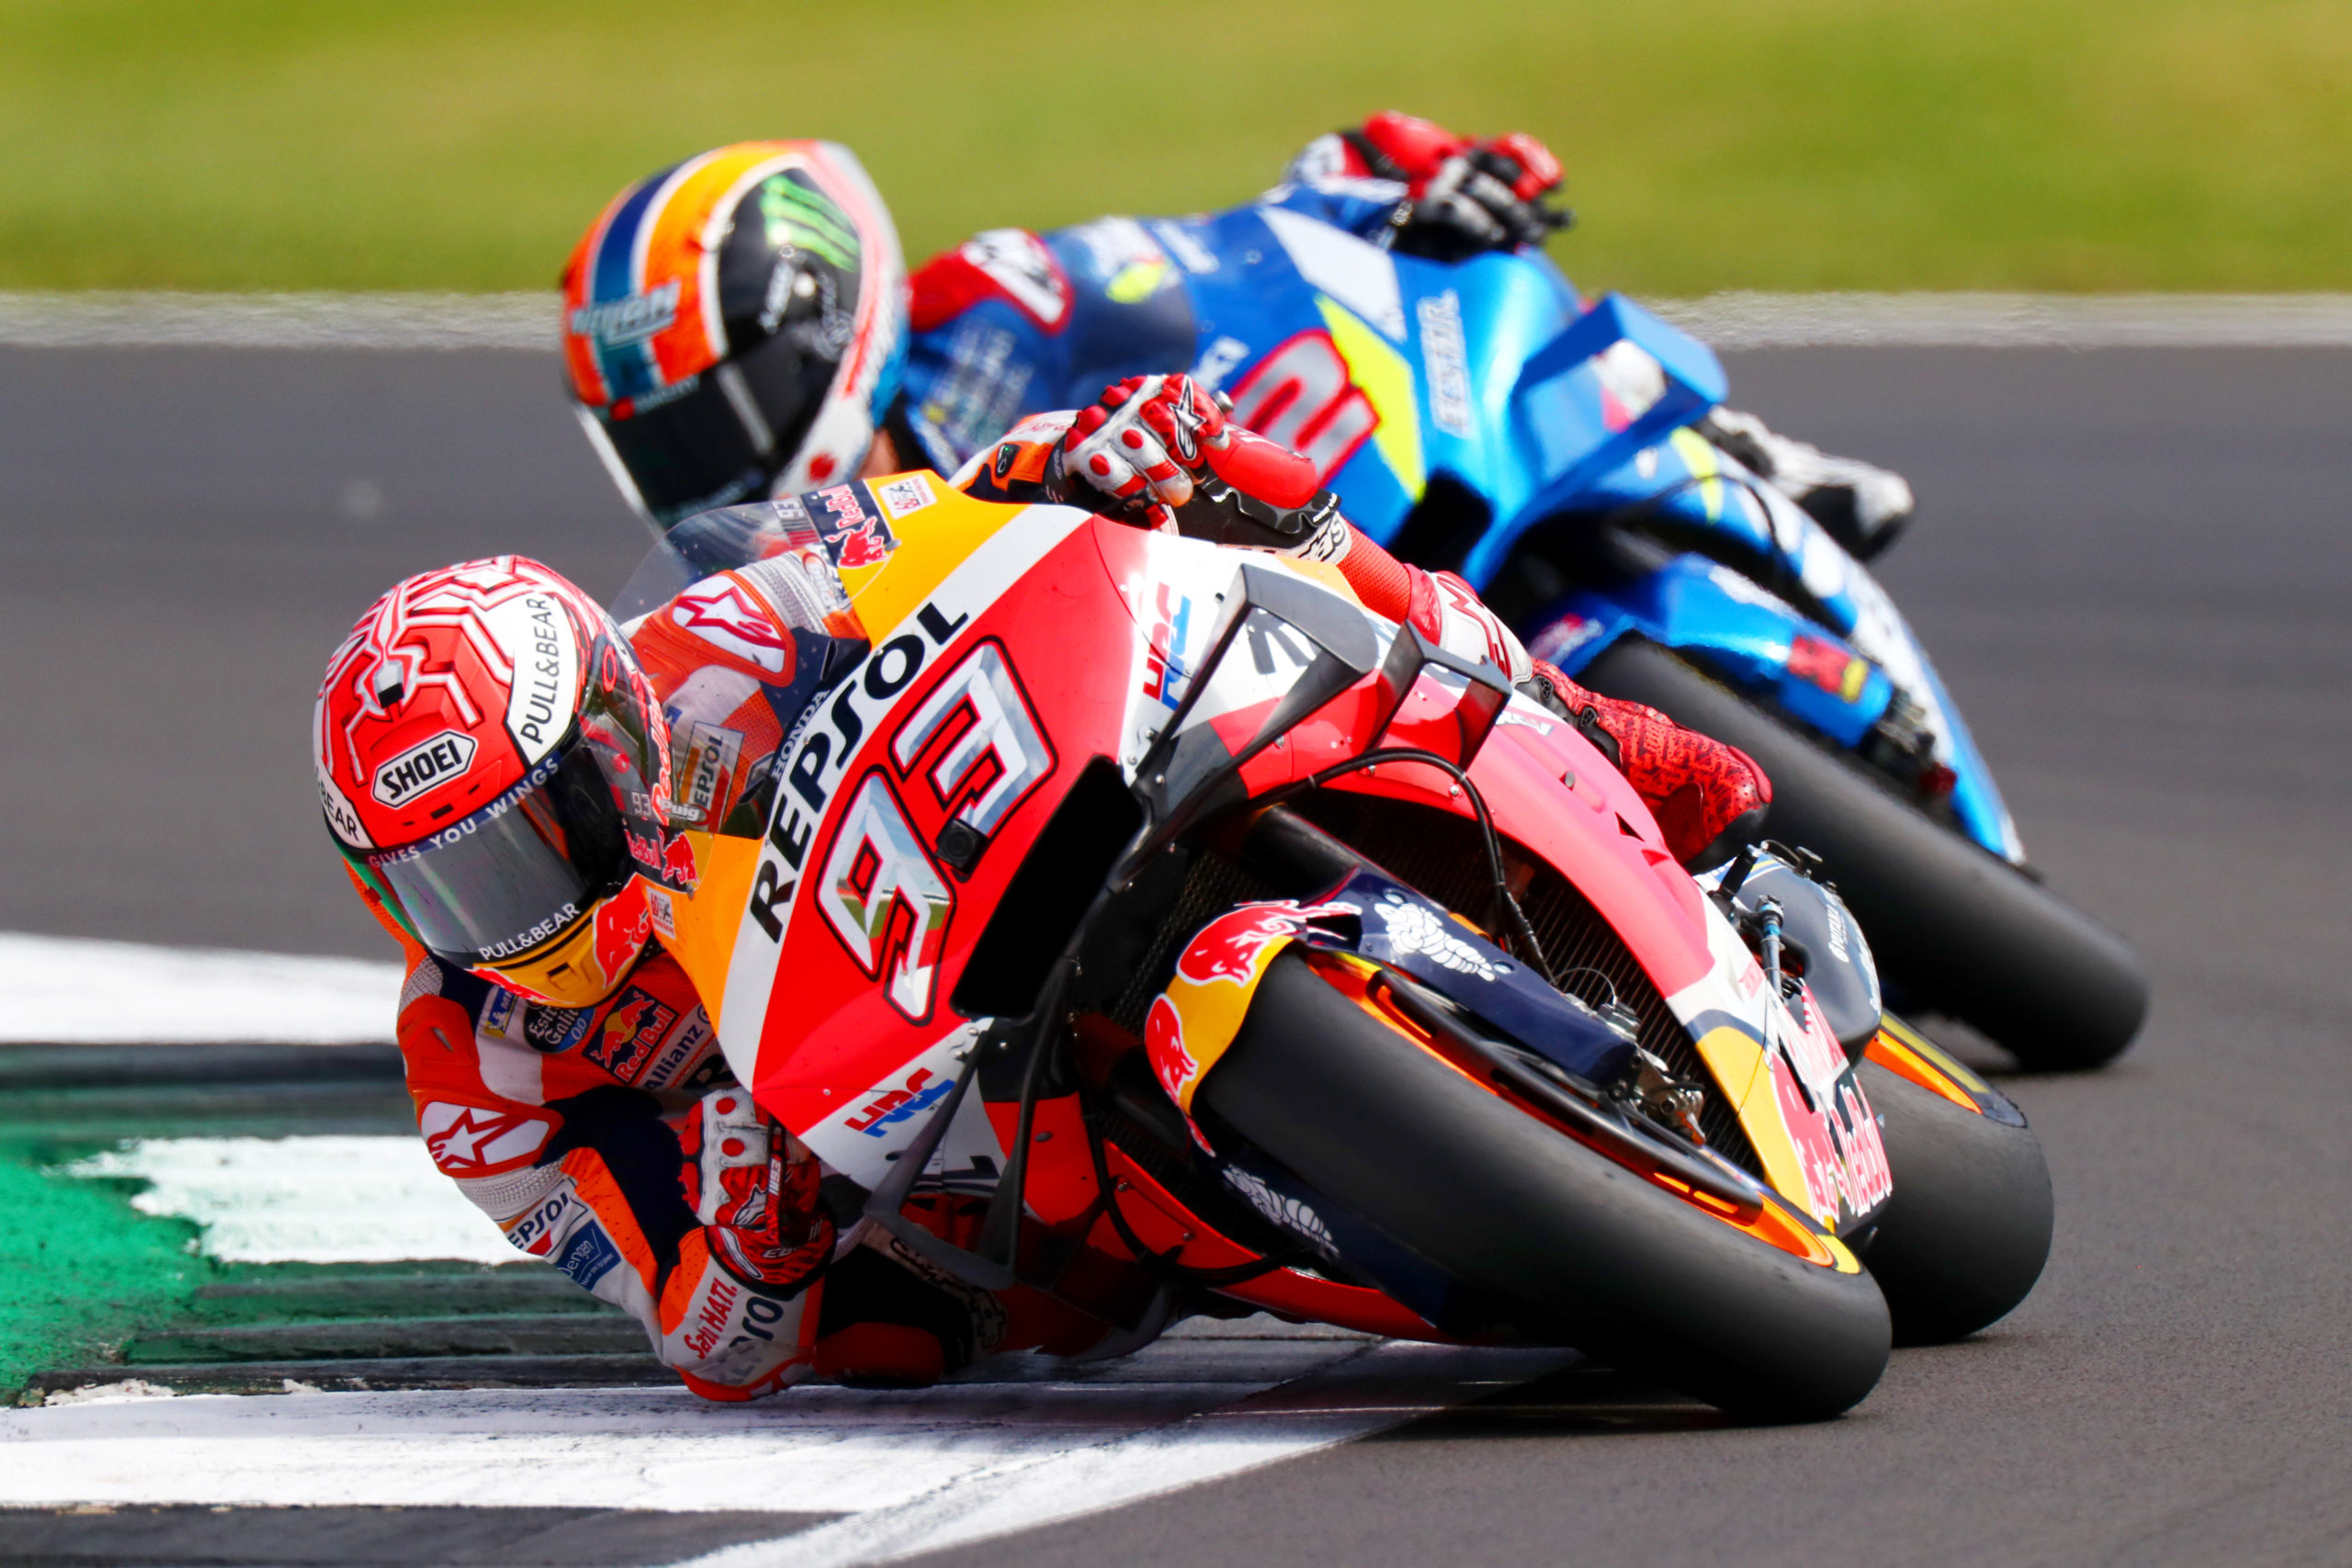 Motogp Looks To Grow Motorsports Youngest Audience With Move To Nbc Sports